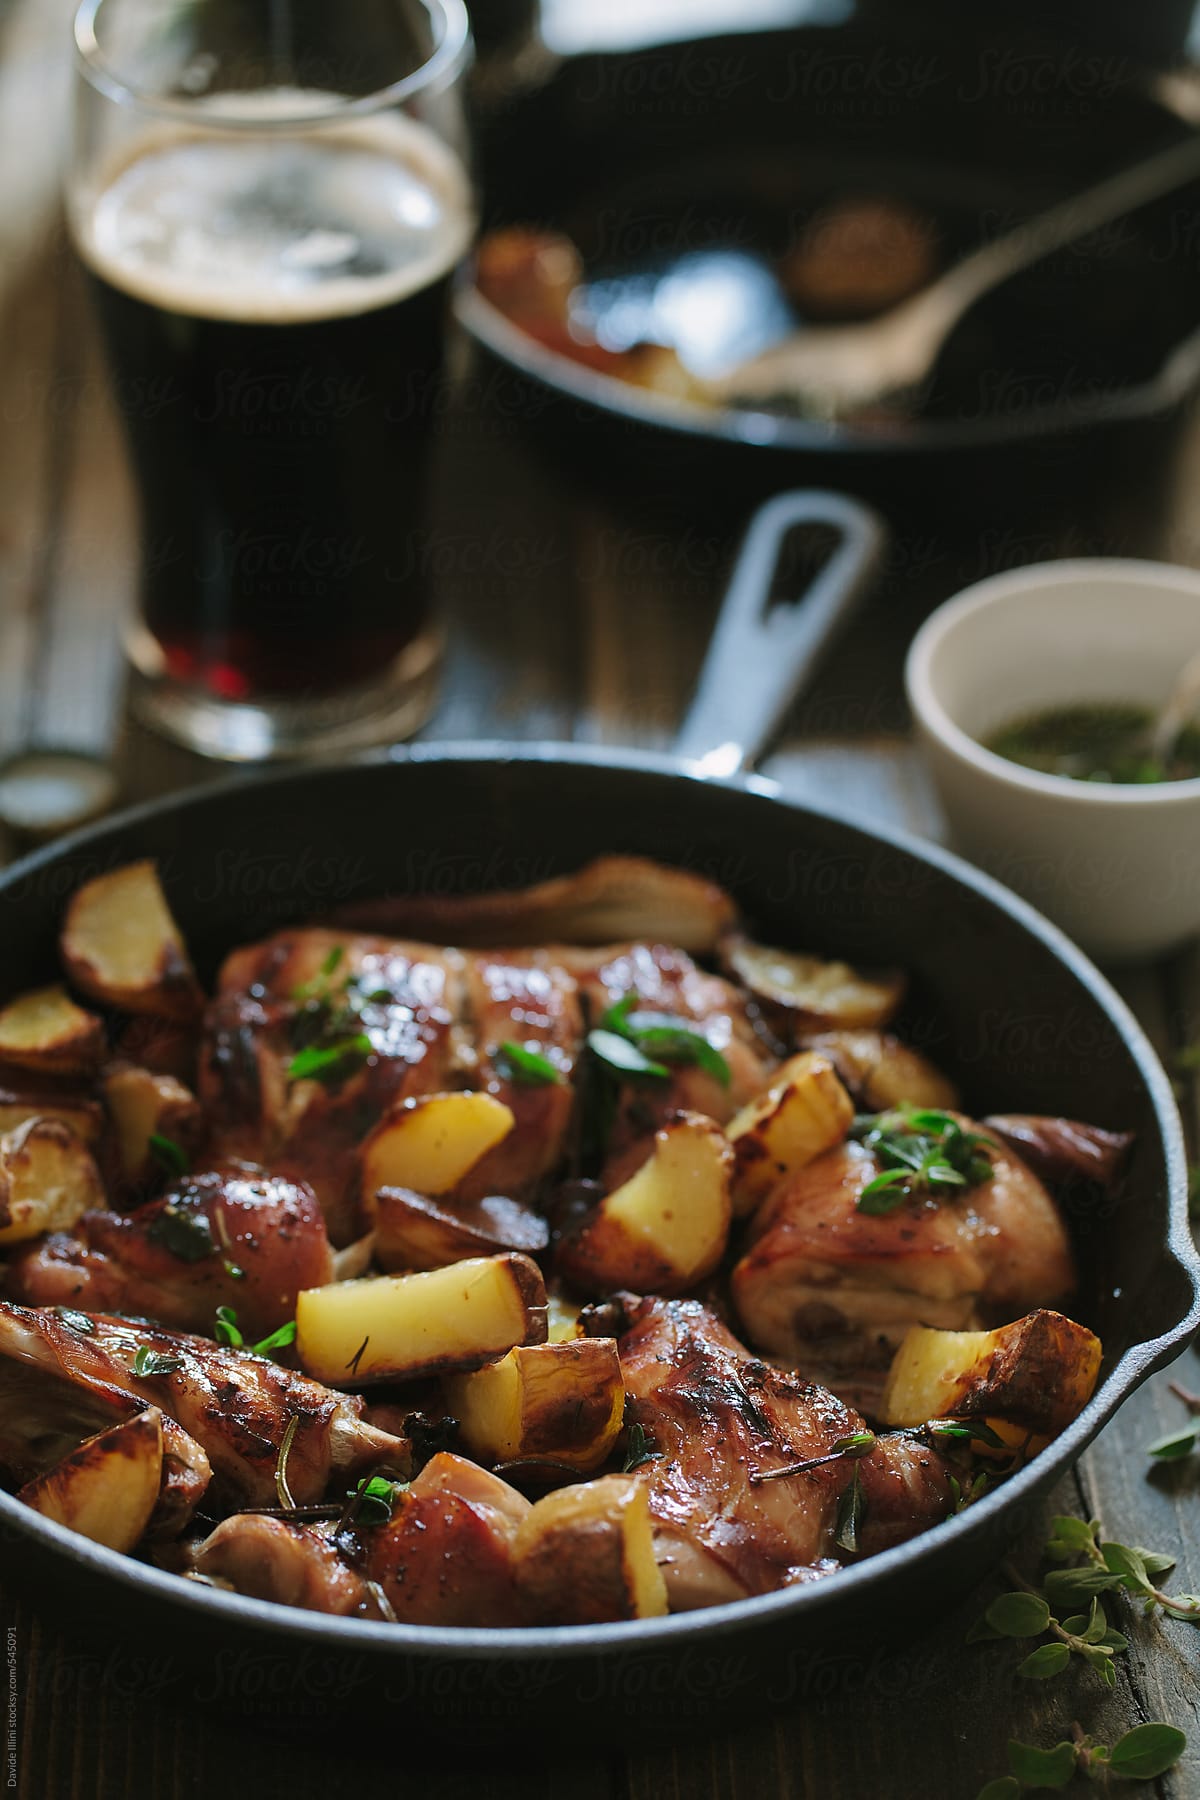 Roasted rabbit with potatoes